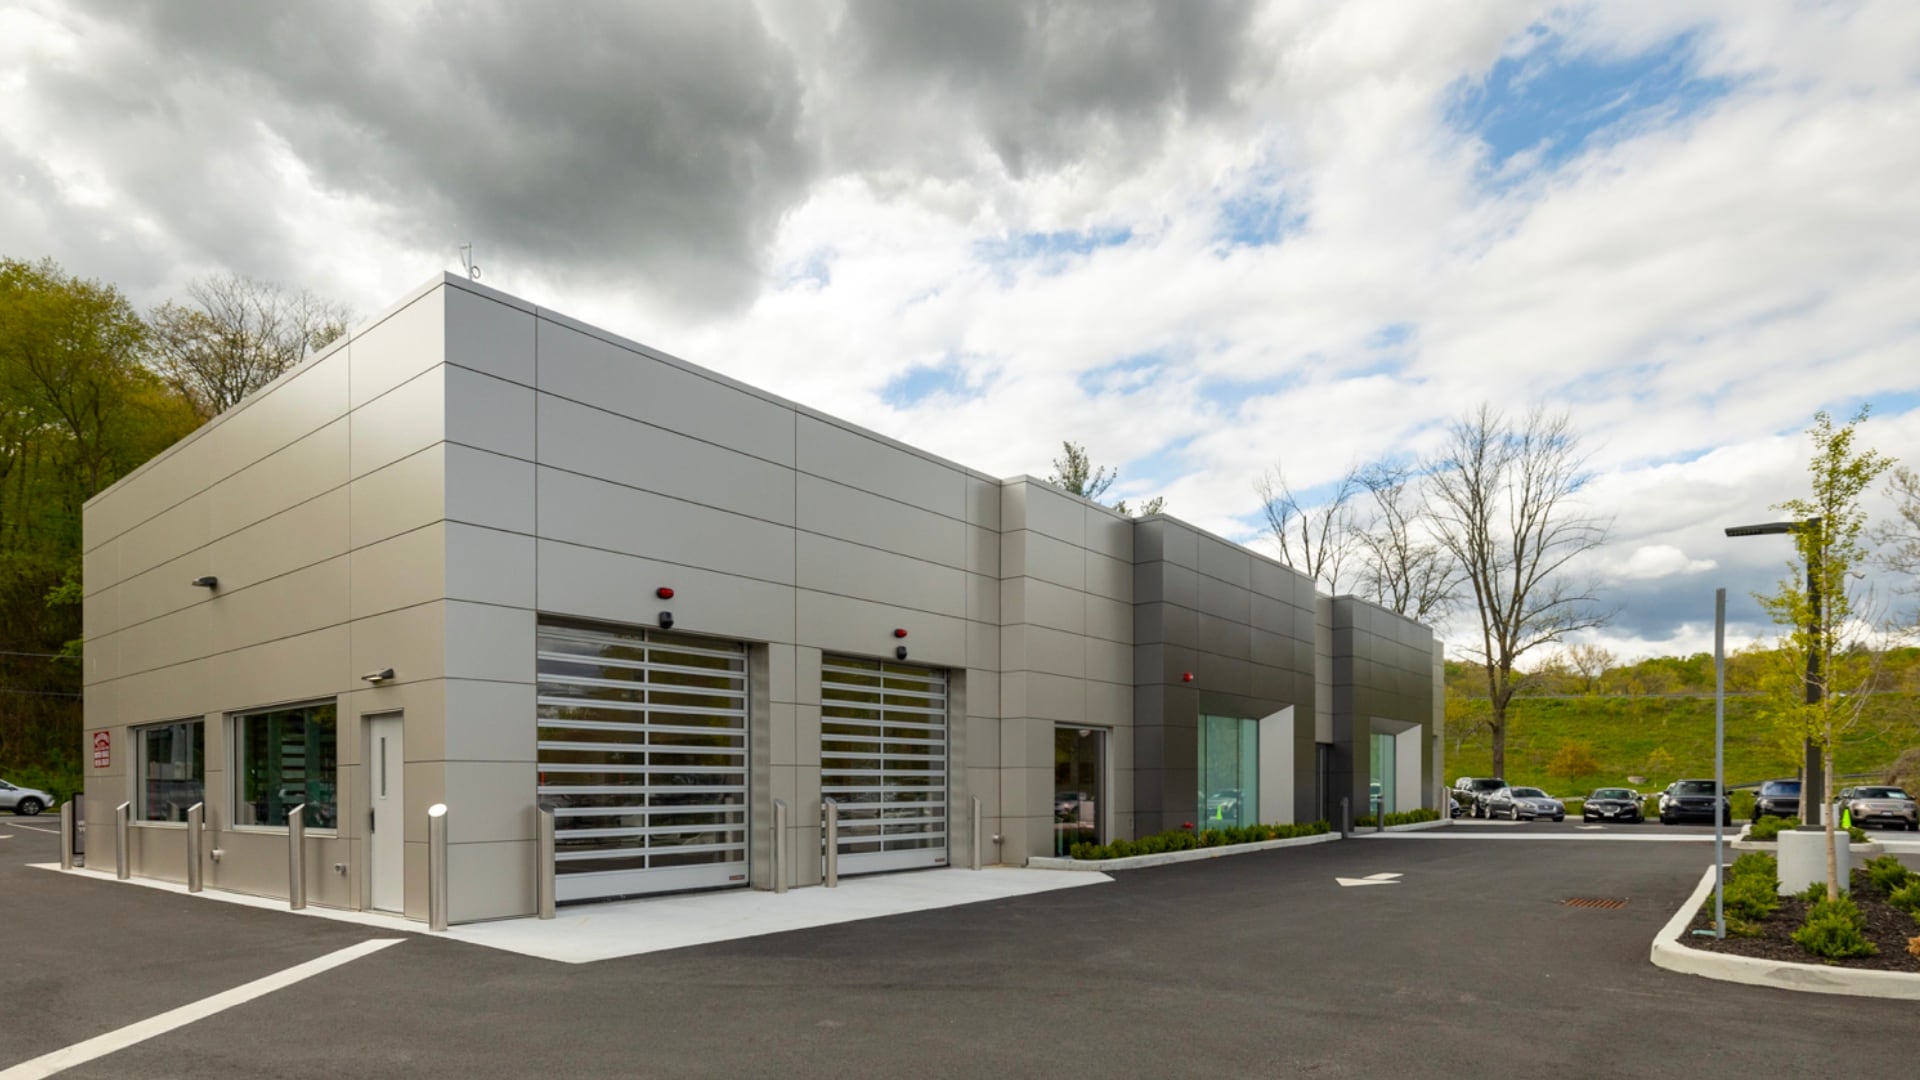 Exterior of Land Rover Mt. Kisco. Vehicle service bays are seen.